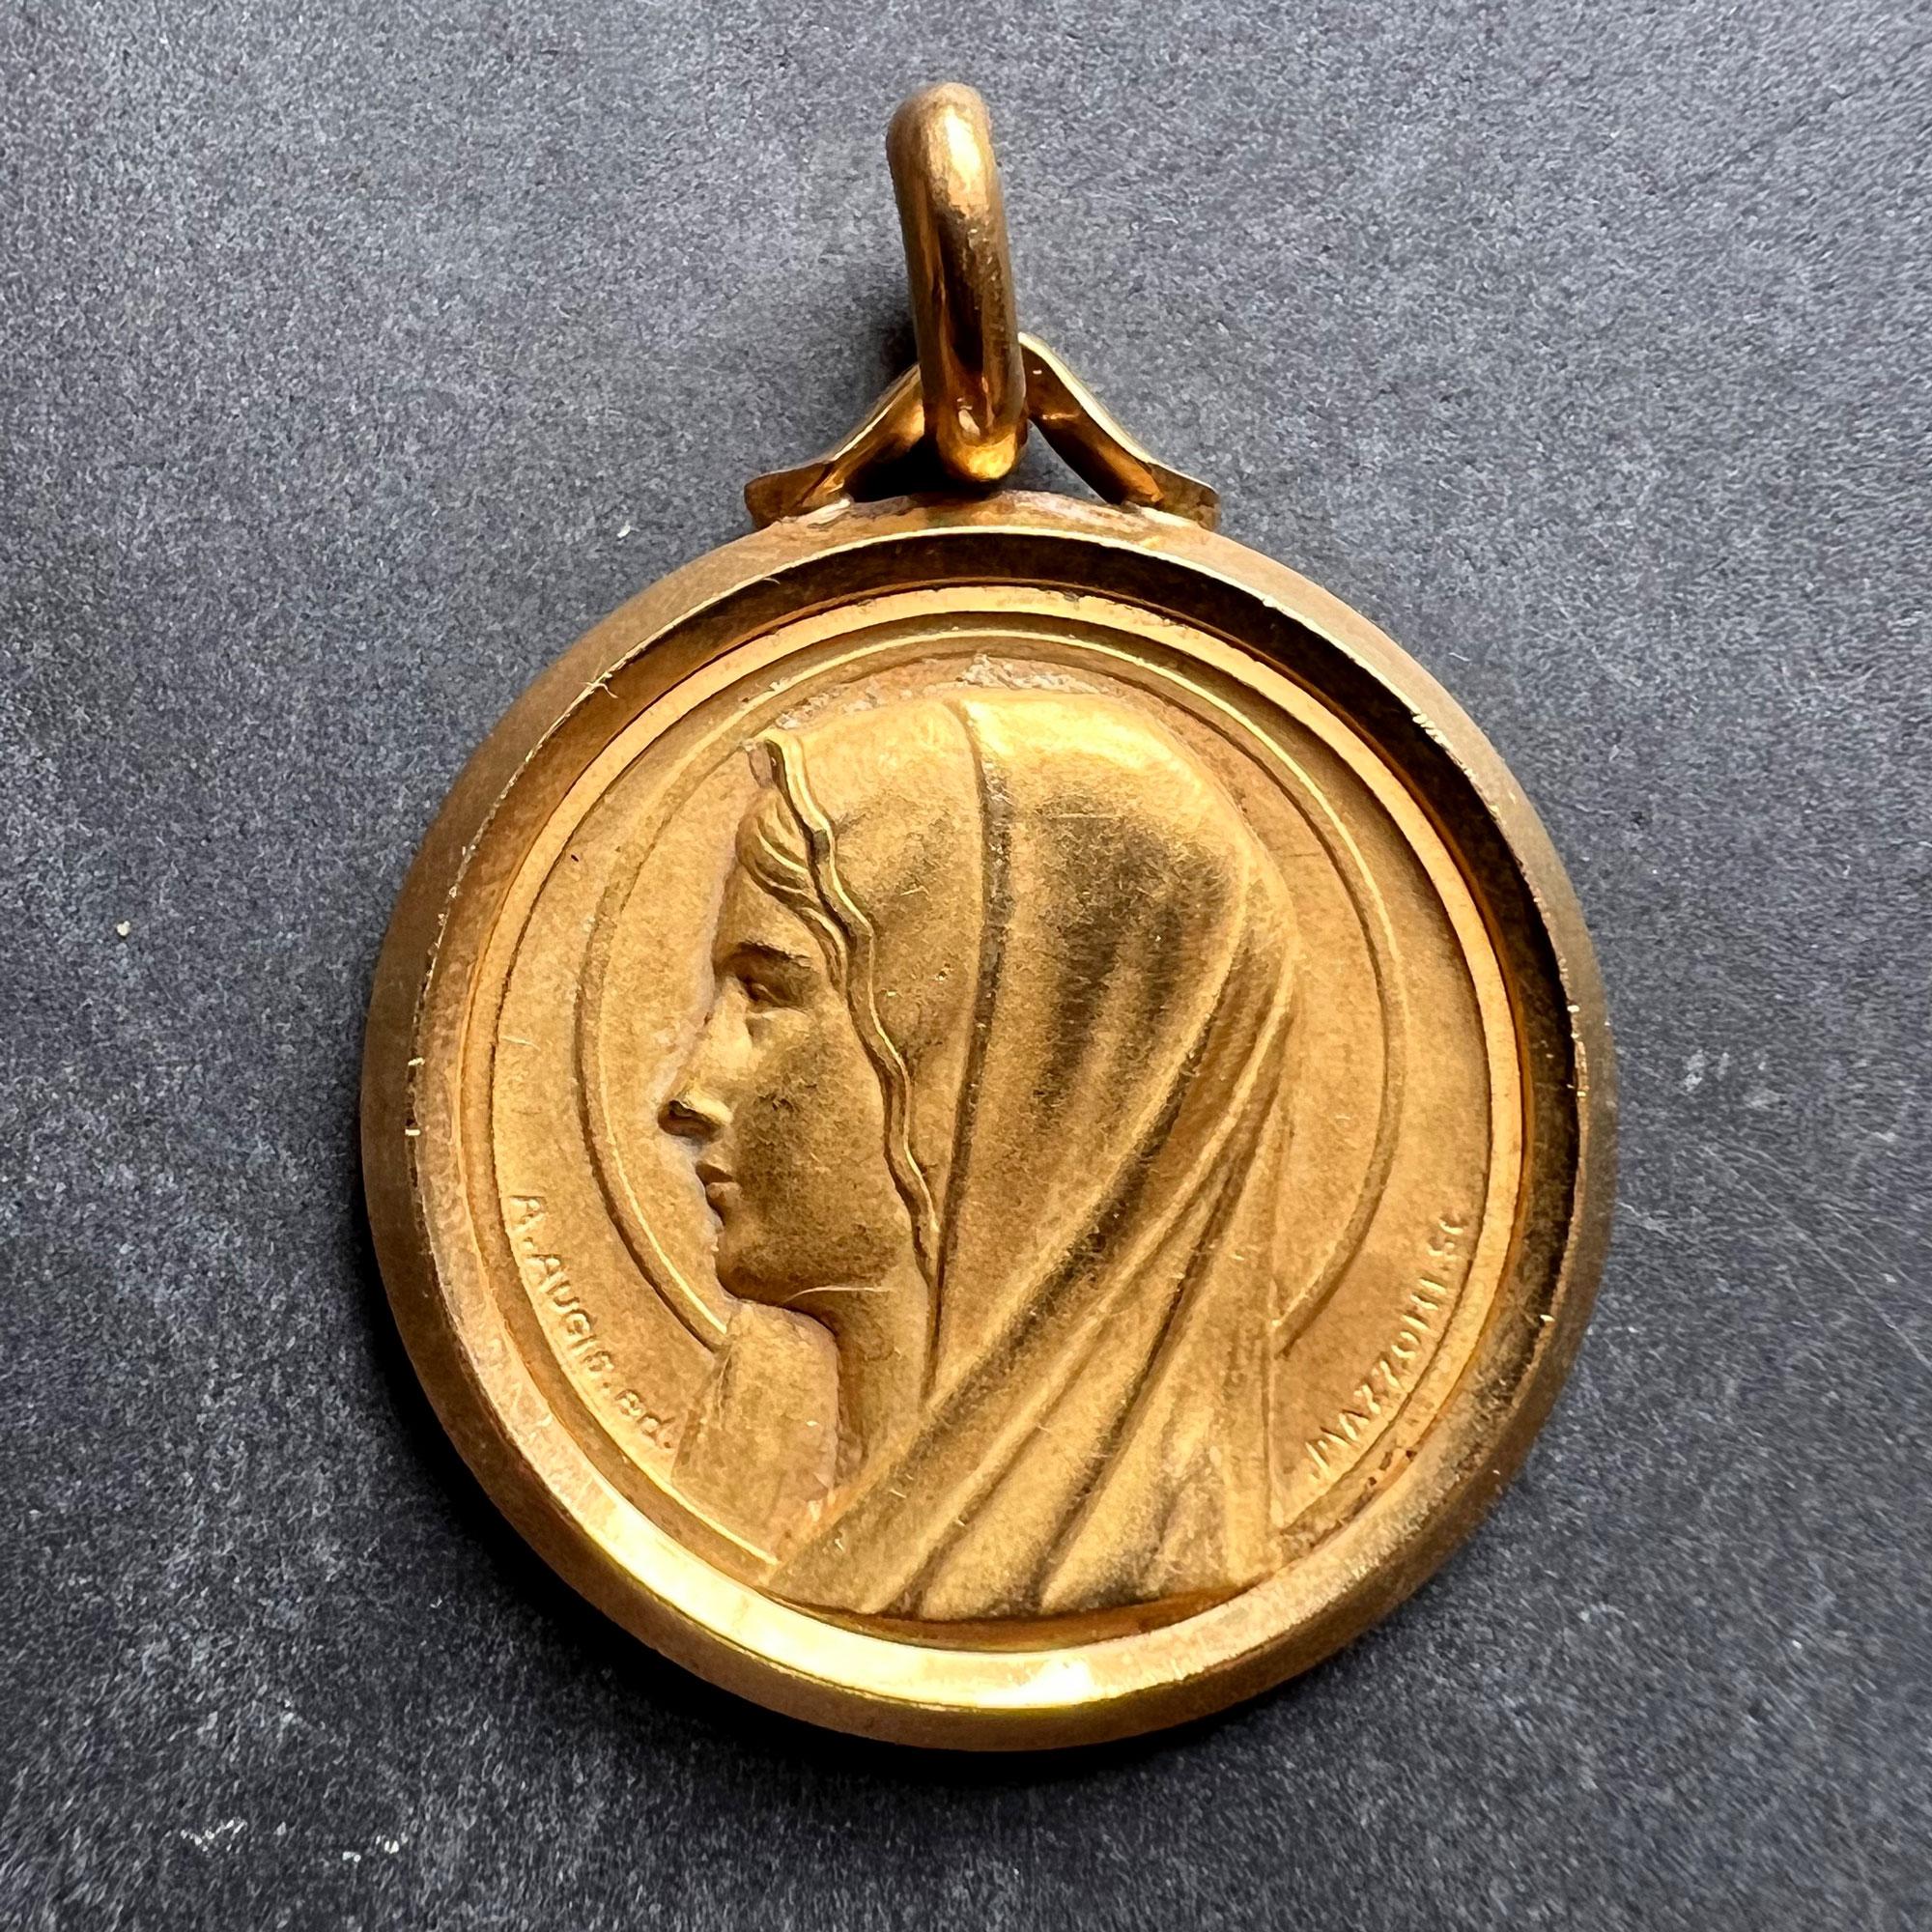 A French 18 karat (18K) yellow gold charm pendant depicting the Virgin Mary, signed A.Augis ED (made by) and Mazzoni SC (sculptor). Stamped with the eagles head for French manufacture and 18 karat gold with maker’s mark for Augis.

Dimensions: 2.9 x